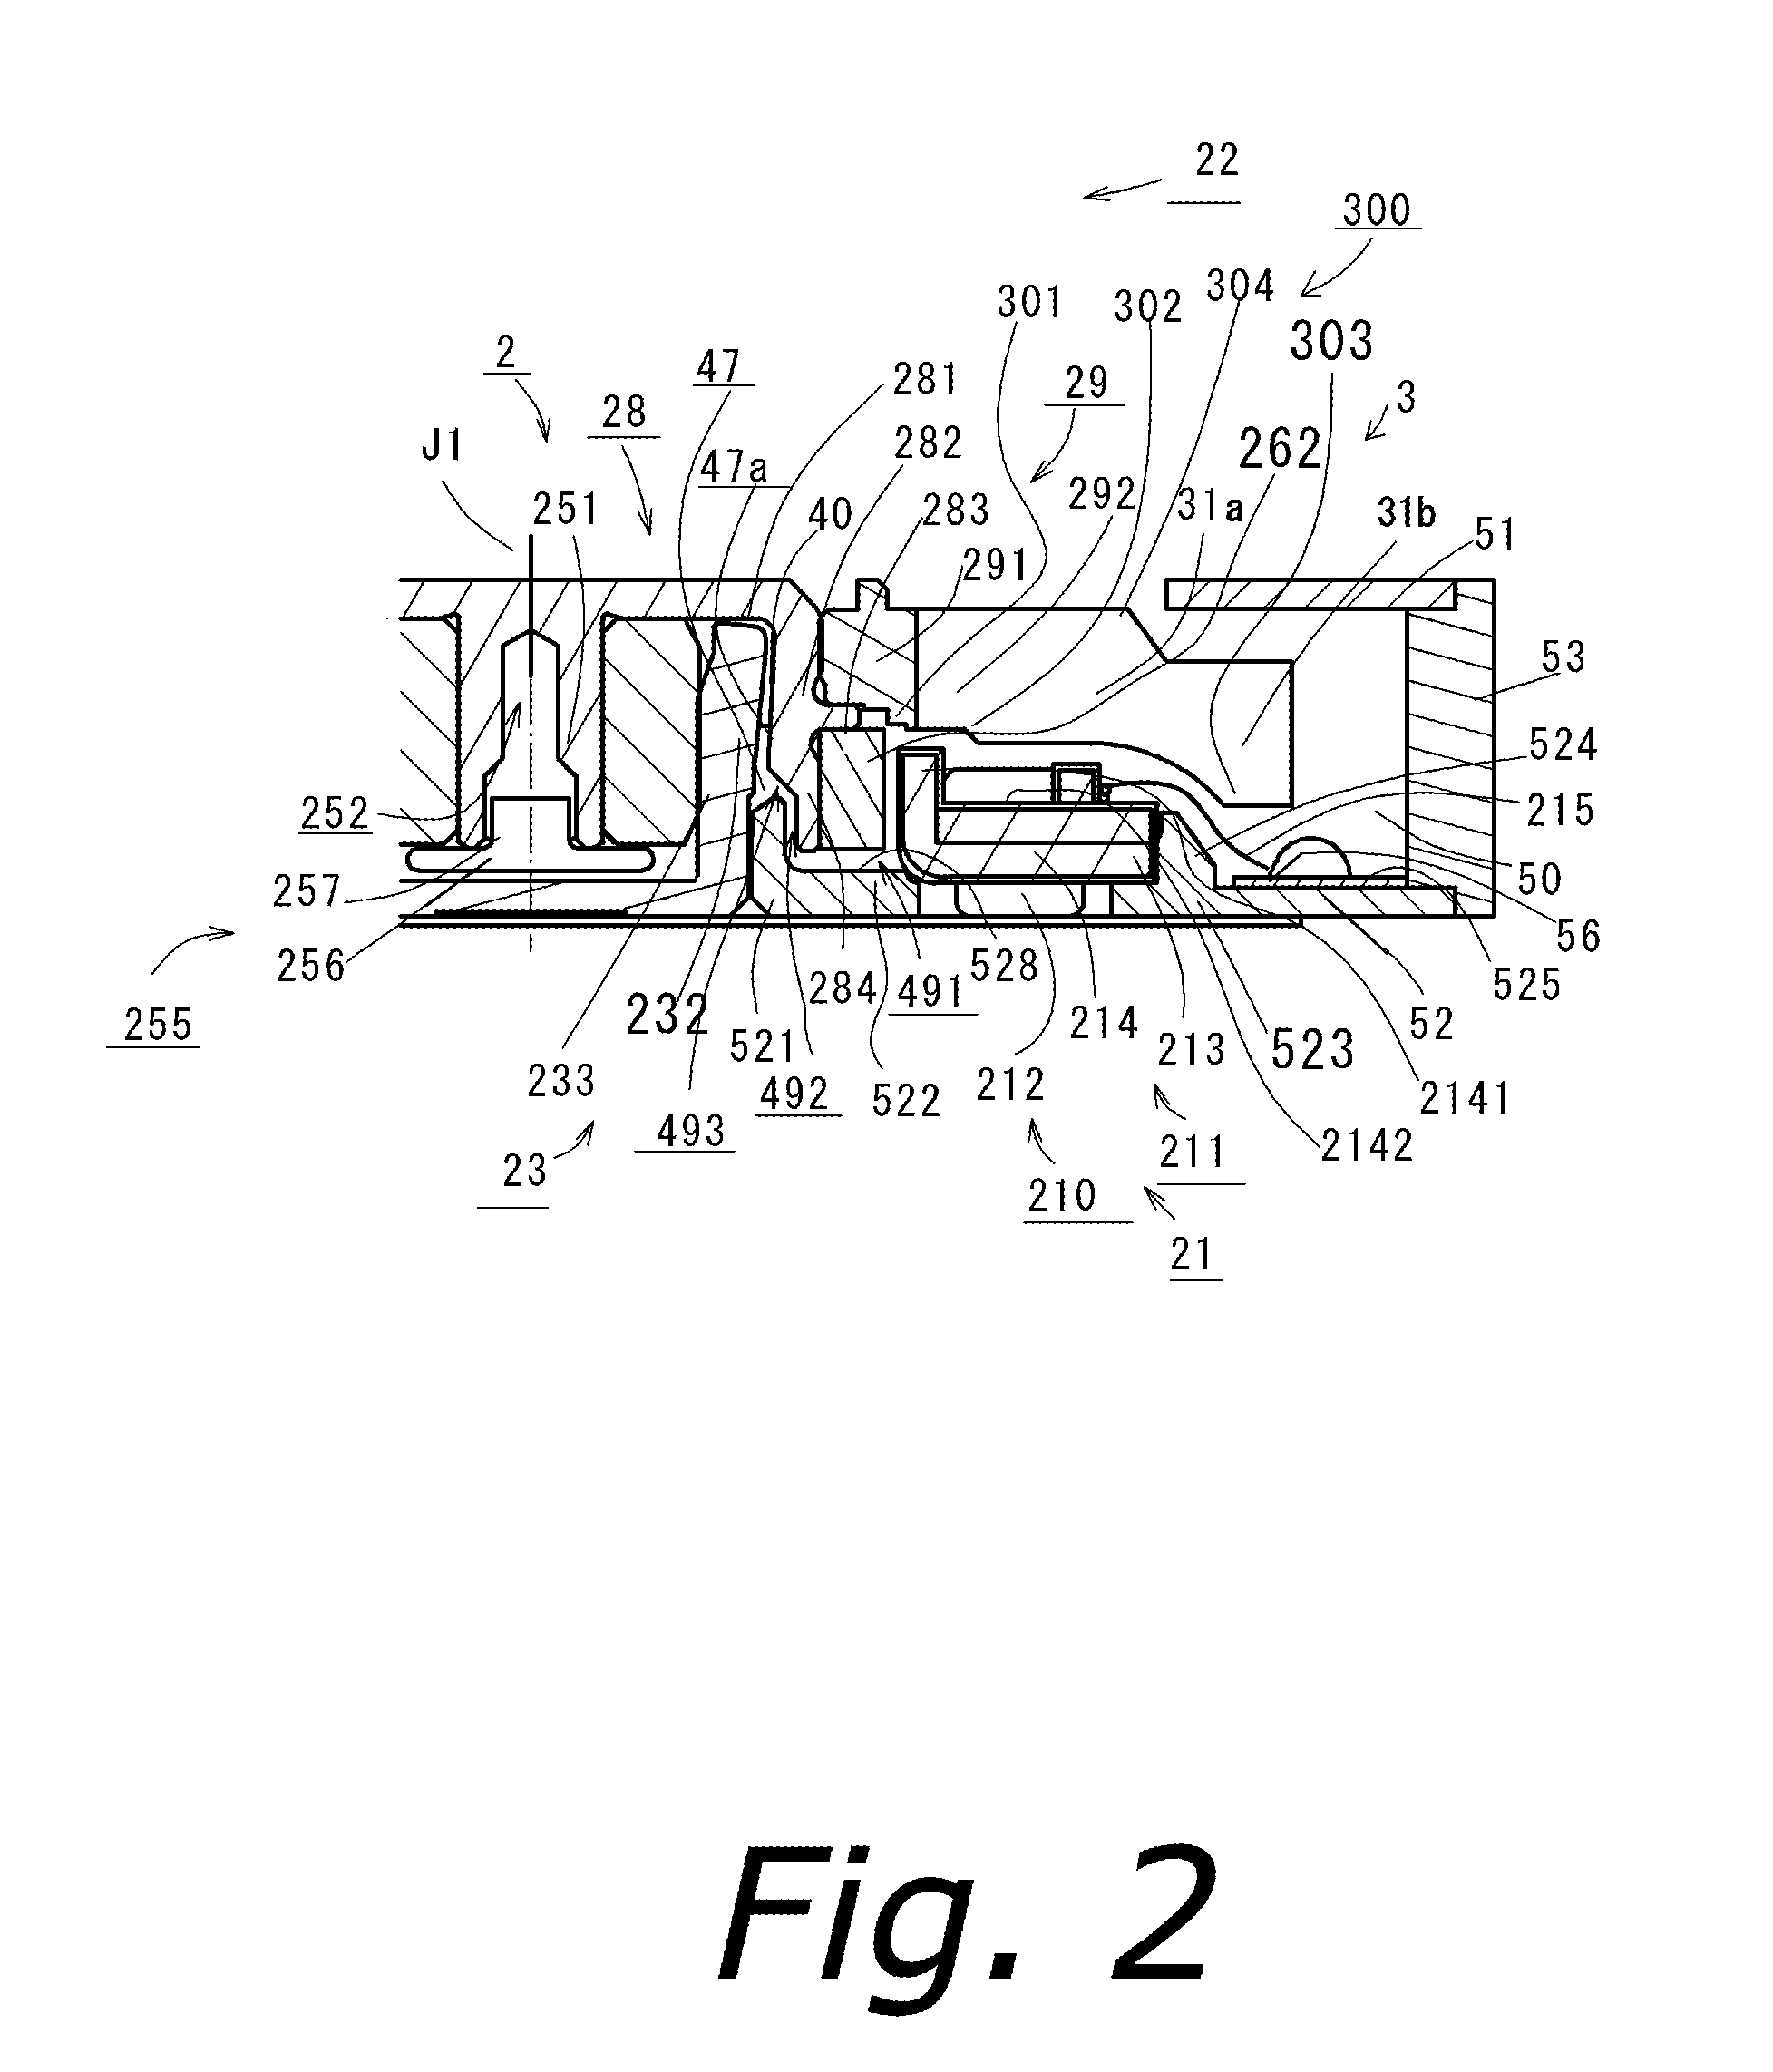 Blower fan and electronic device